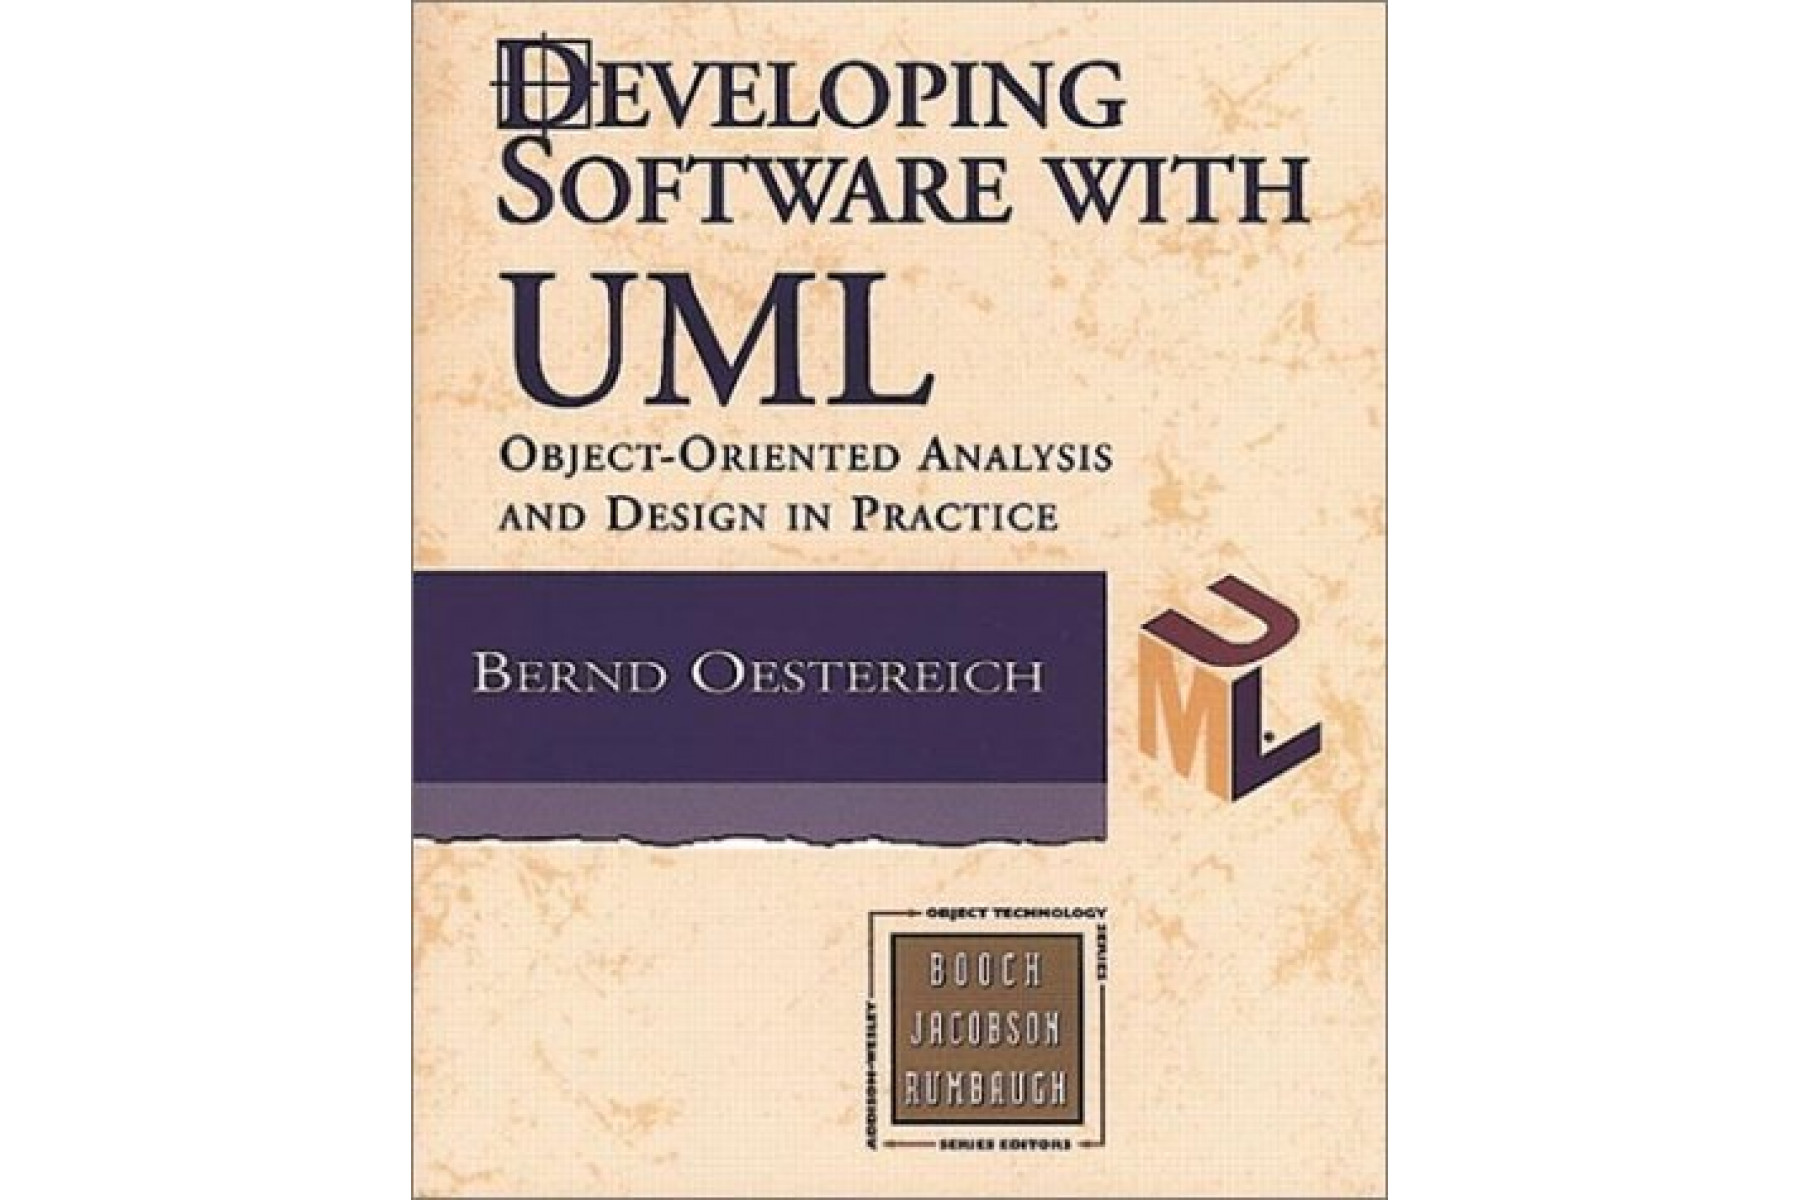 Developing Software with UML: Object-oriented analysis and design in practice